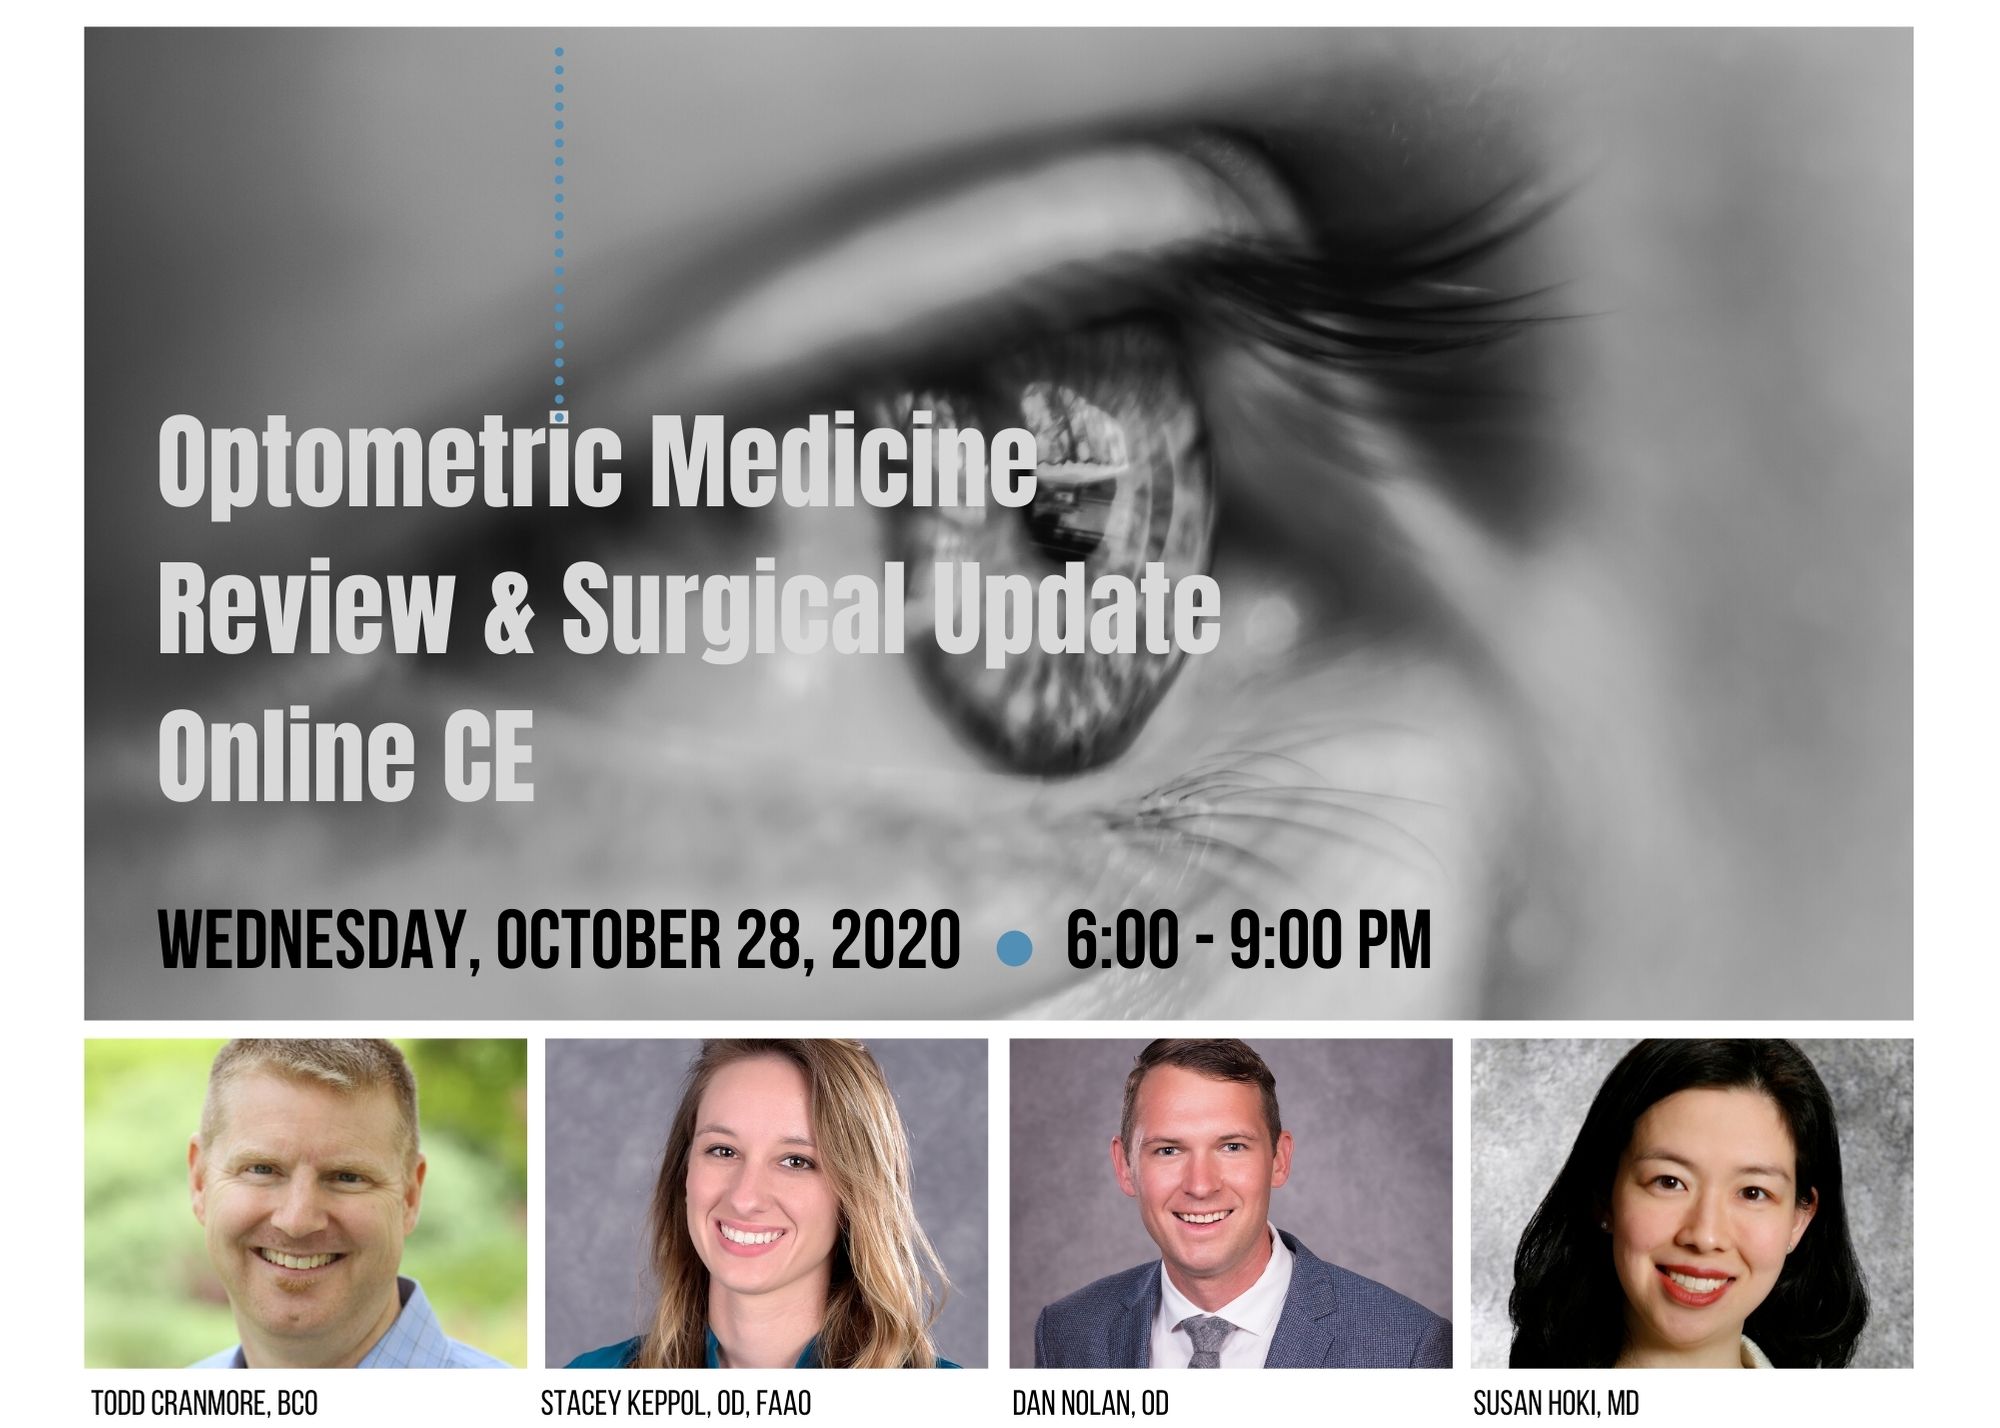 Online CE 2020 Optometric Medicine Review & Surgical Update Northwest Eye Surgeons